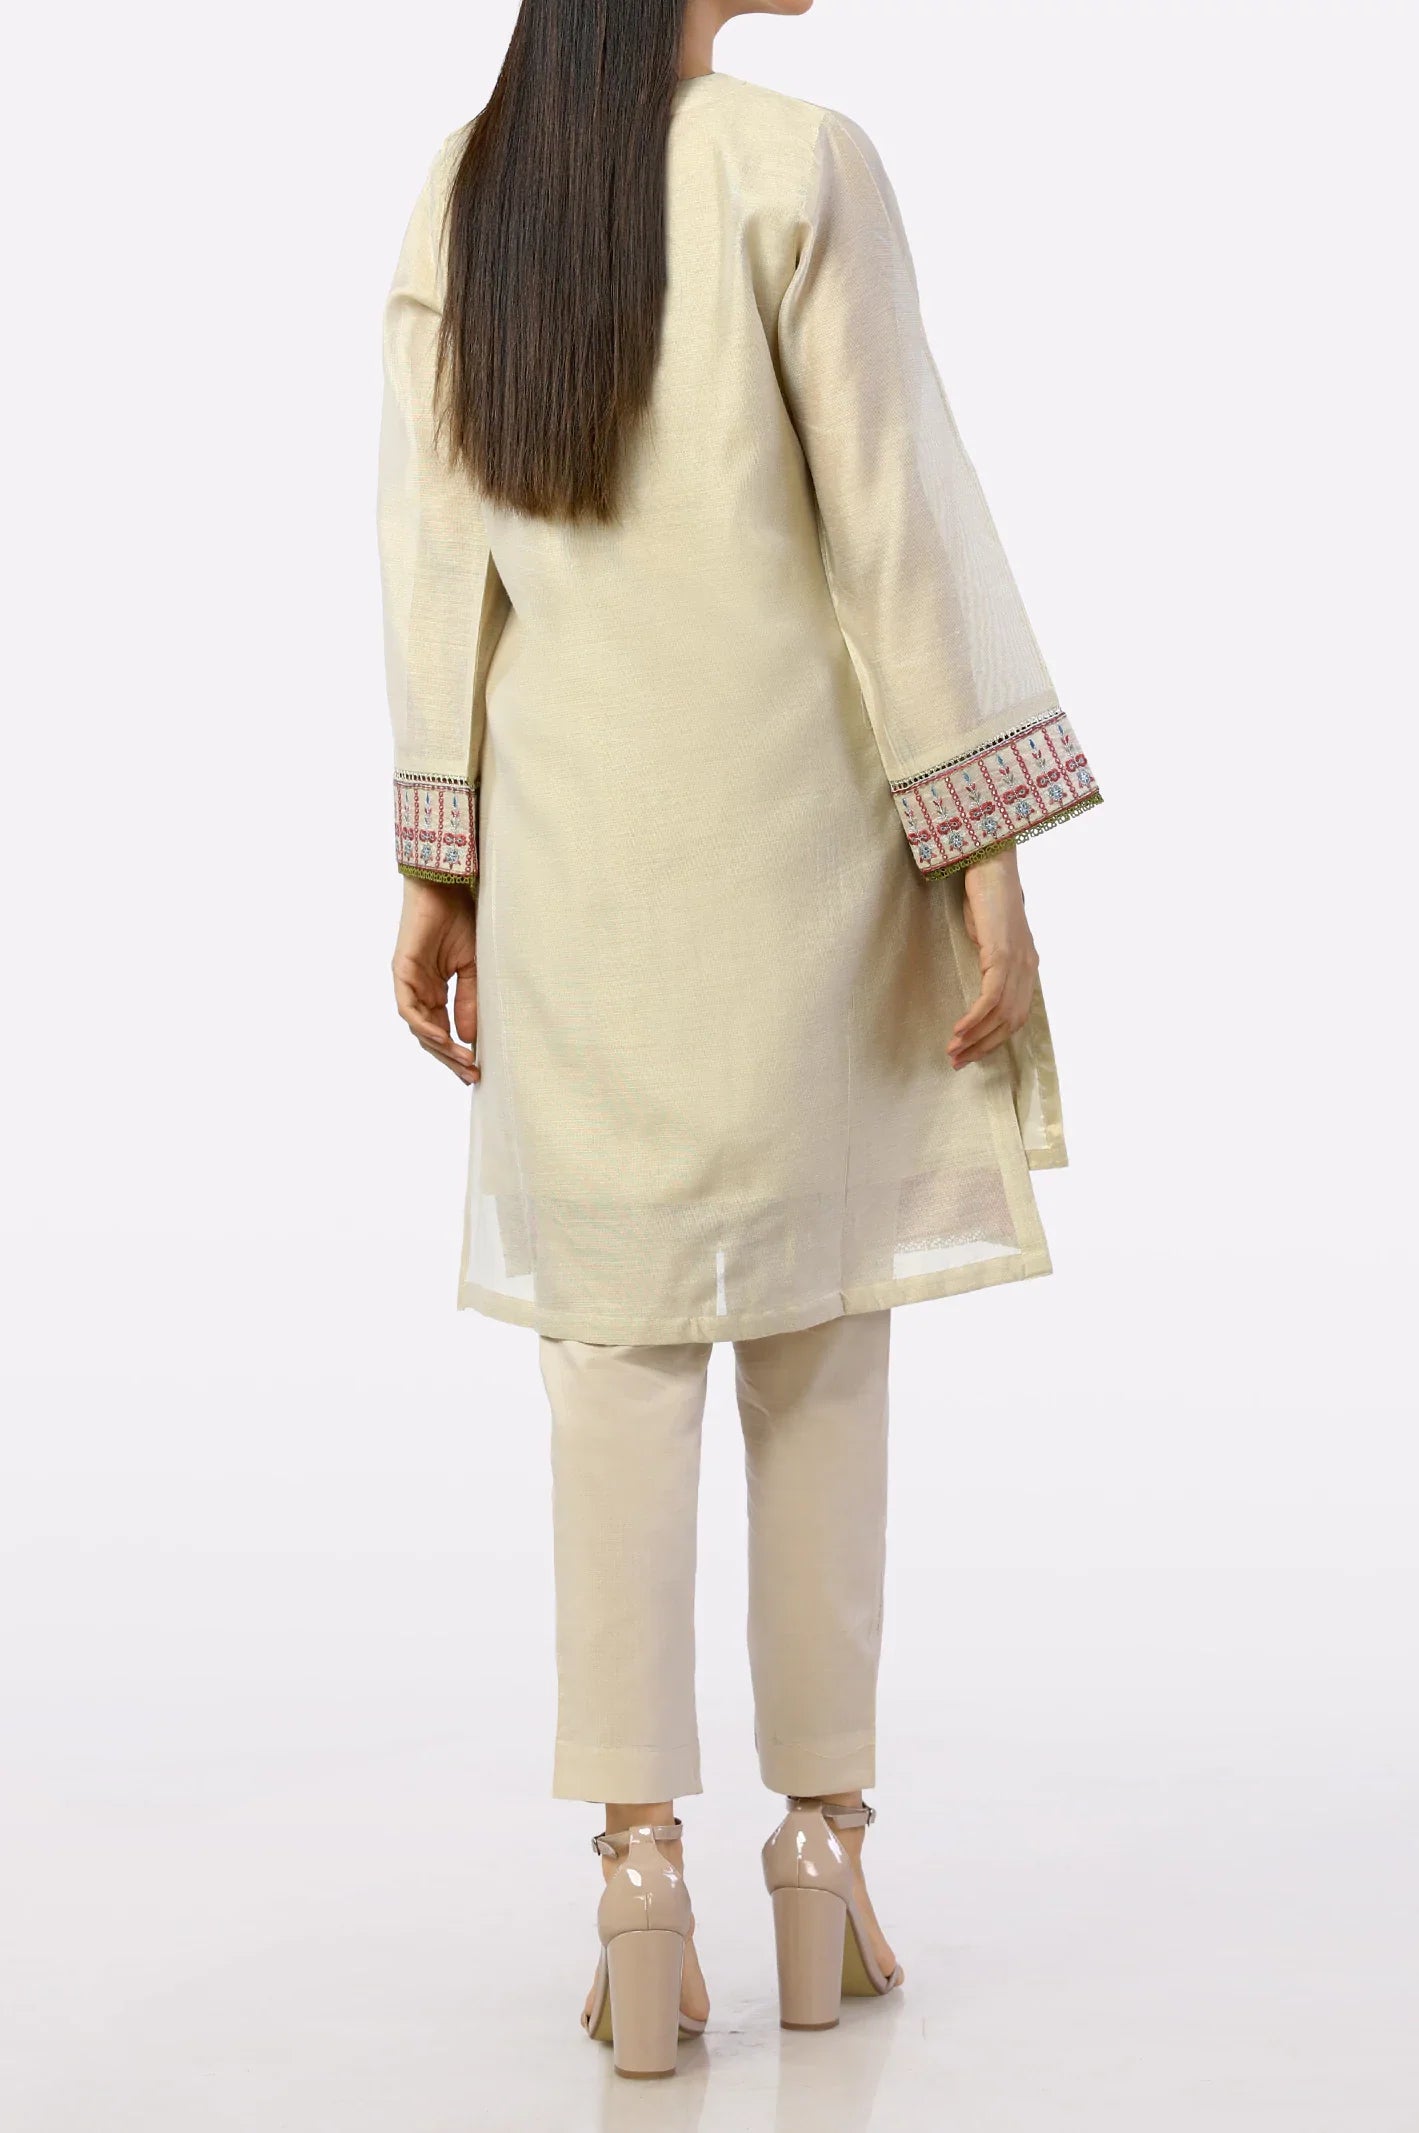 Cream Embroidered Kurti From Sohaye By Diners